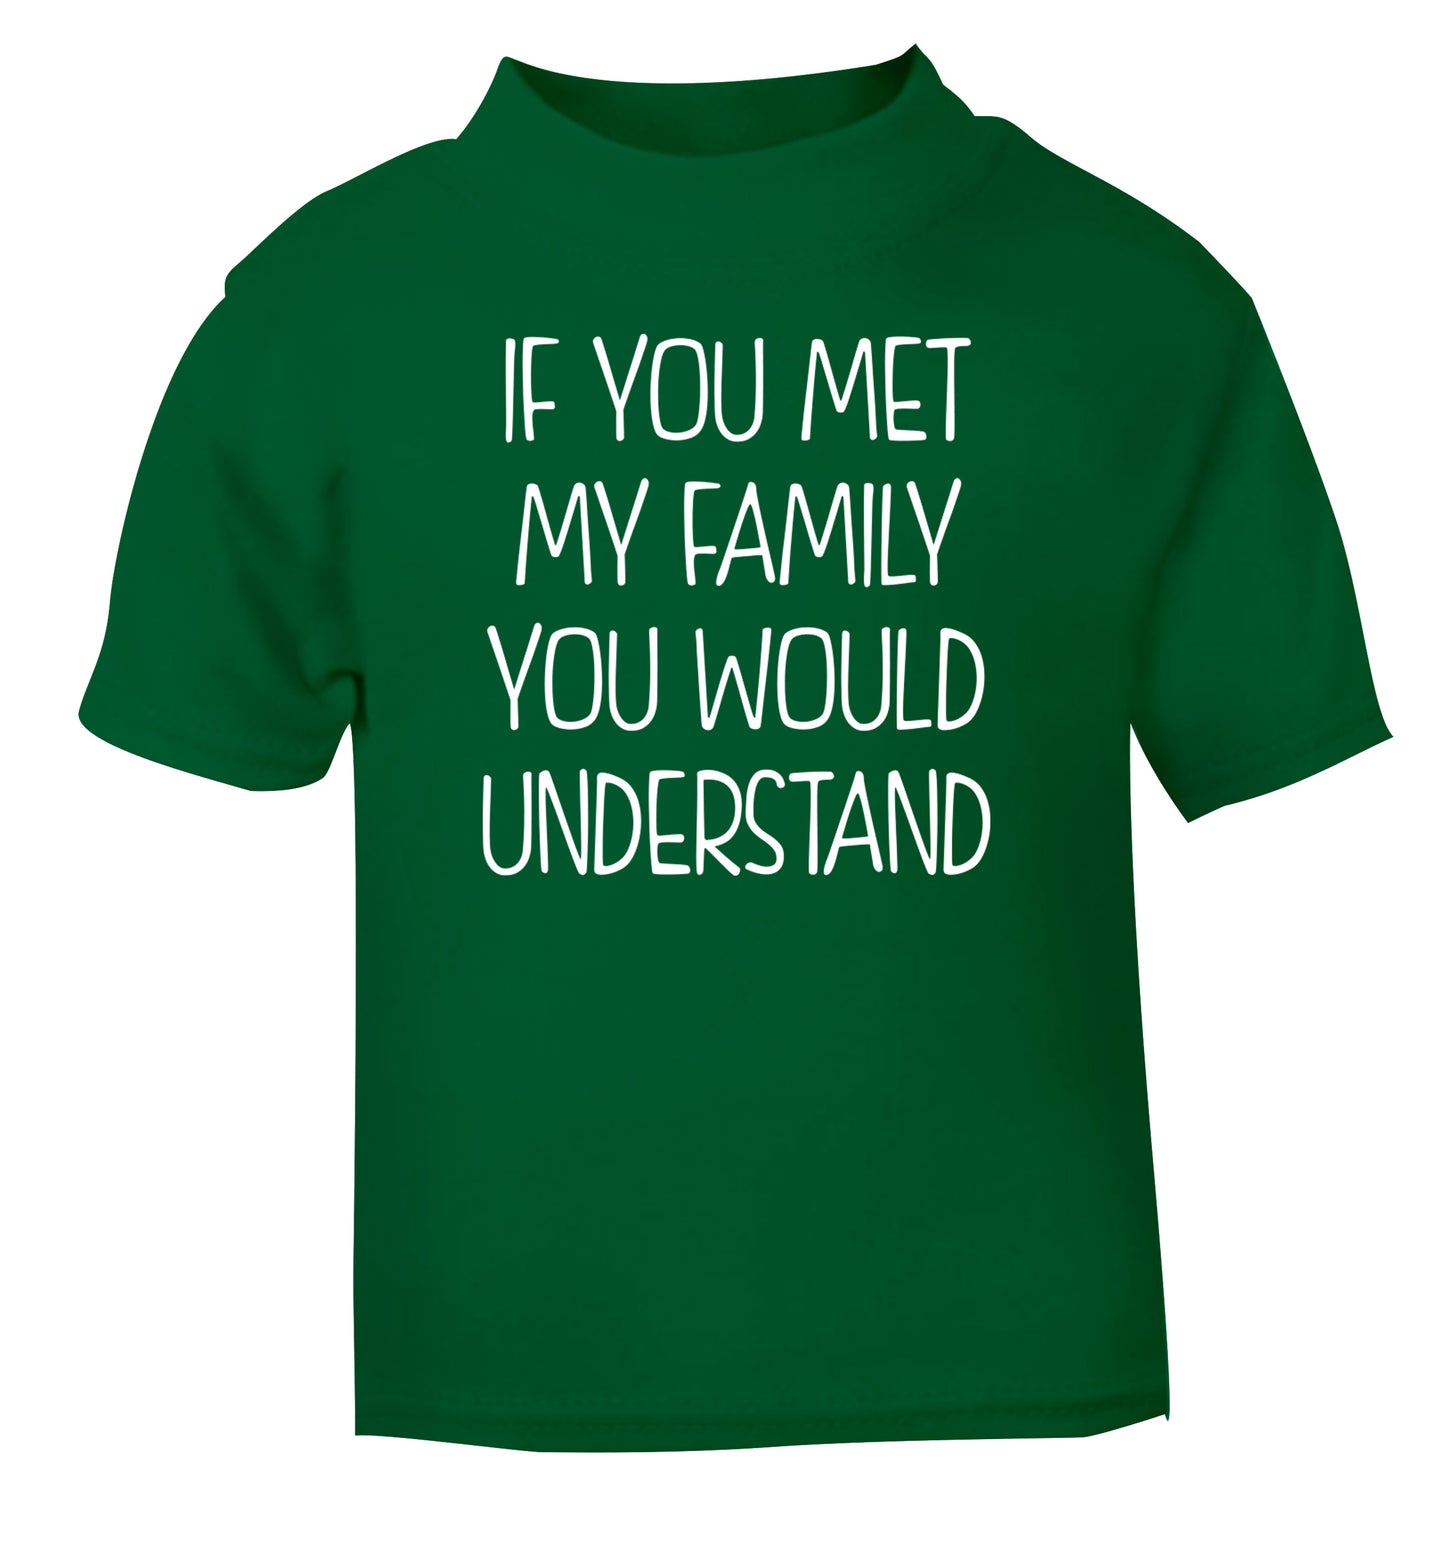 If you met my family you would understand green Baby Toddler Tshirt 2 Years